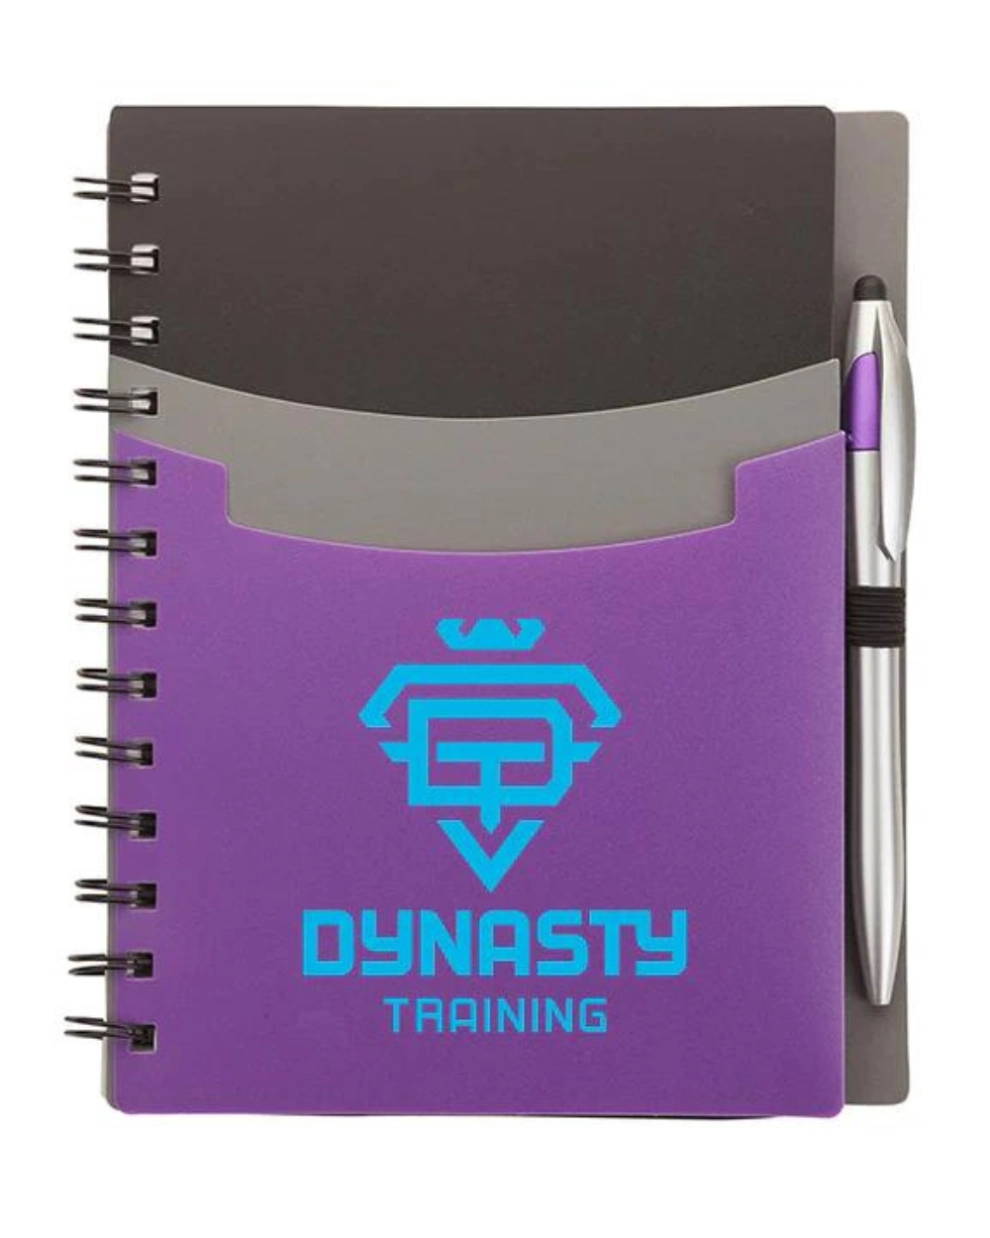 Team Dynasty Training Notebook and Pen